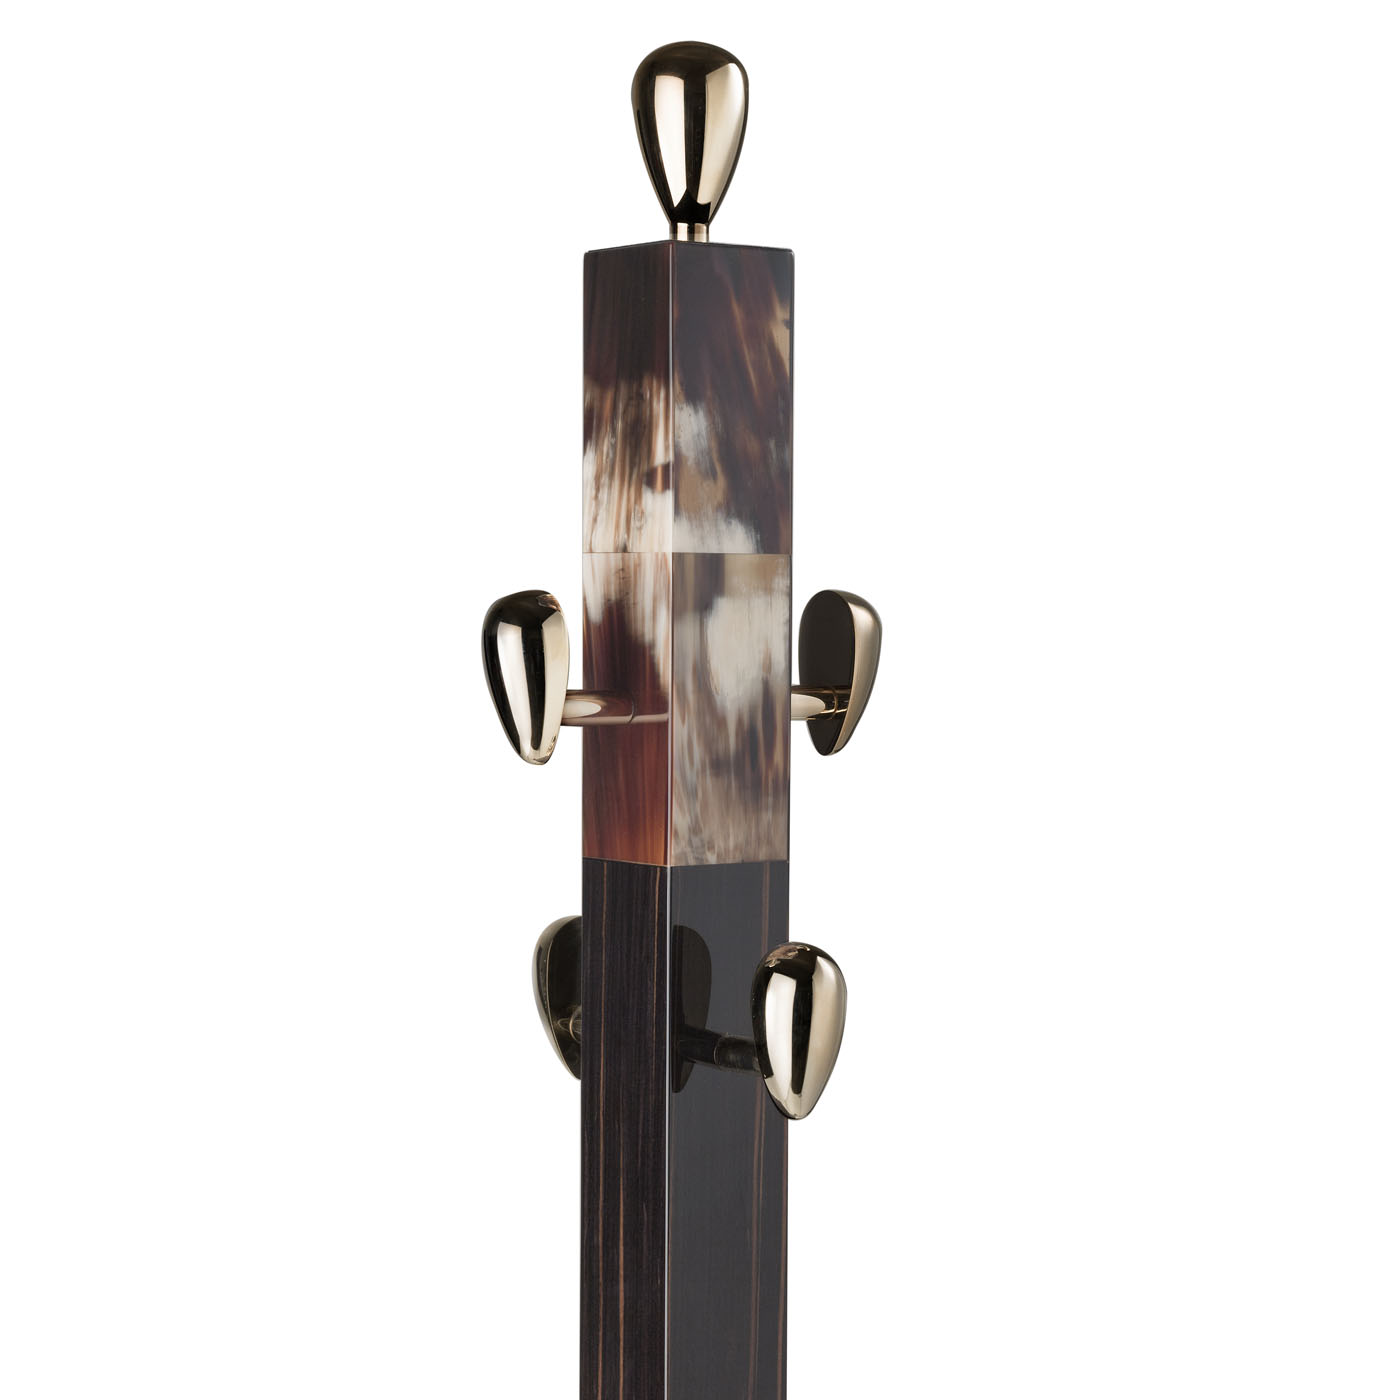 Coat stands and complementary furniture - Giglio coat stand in horn and glossy ebony - hangers detail - Arcahorn